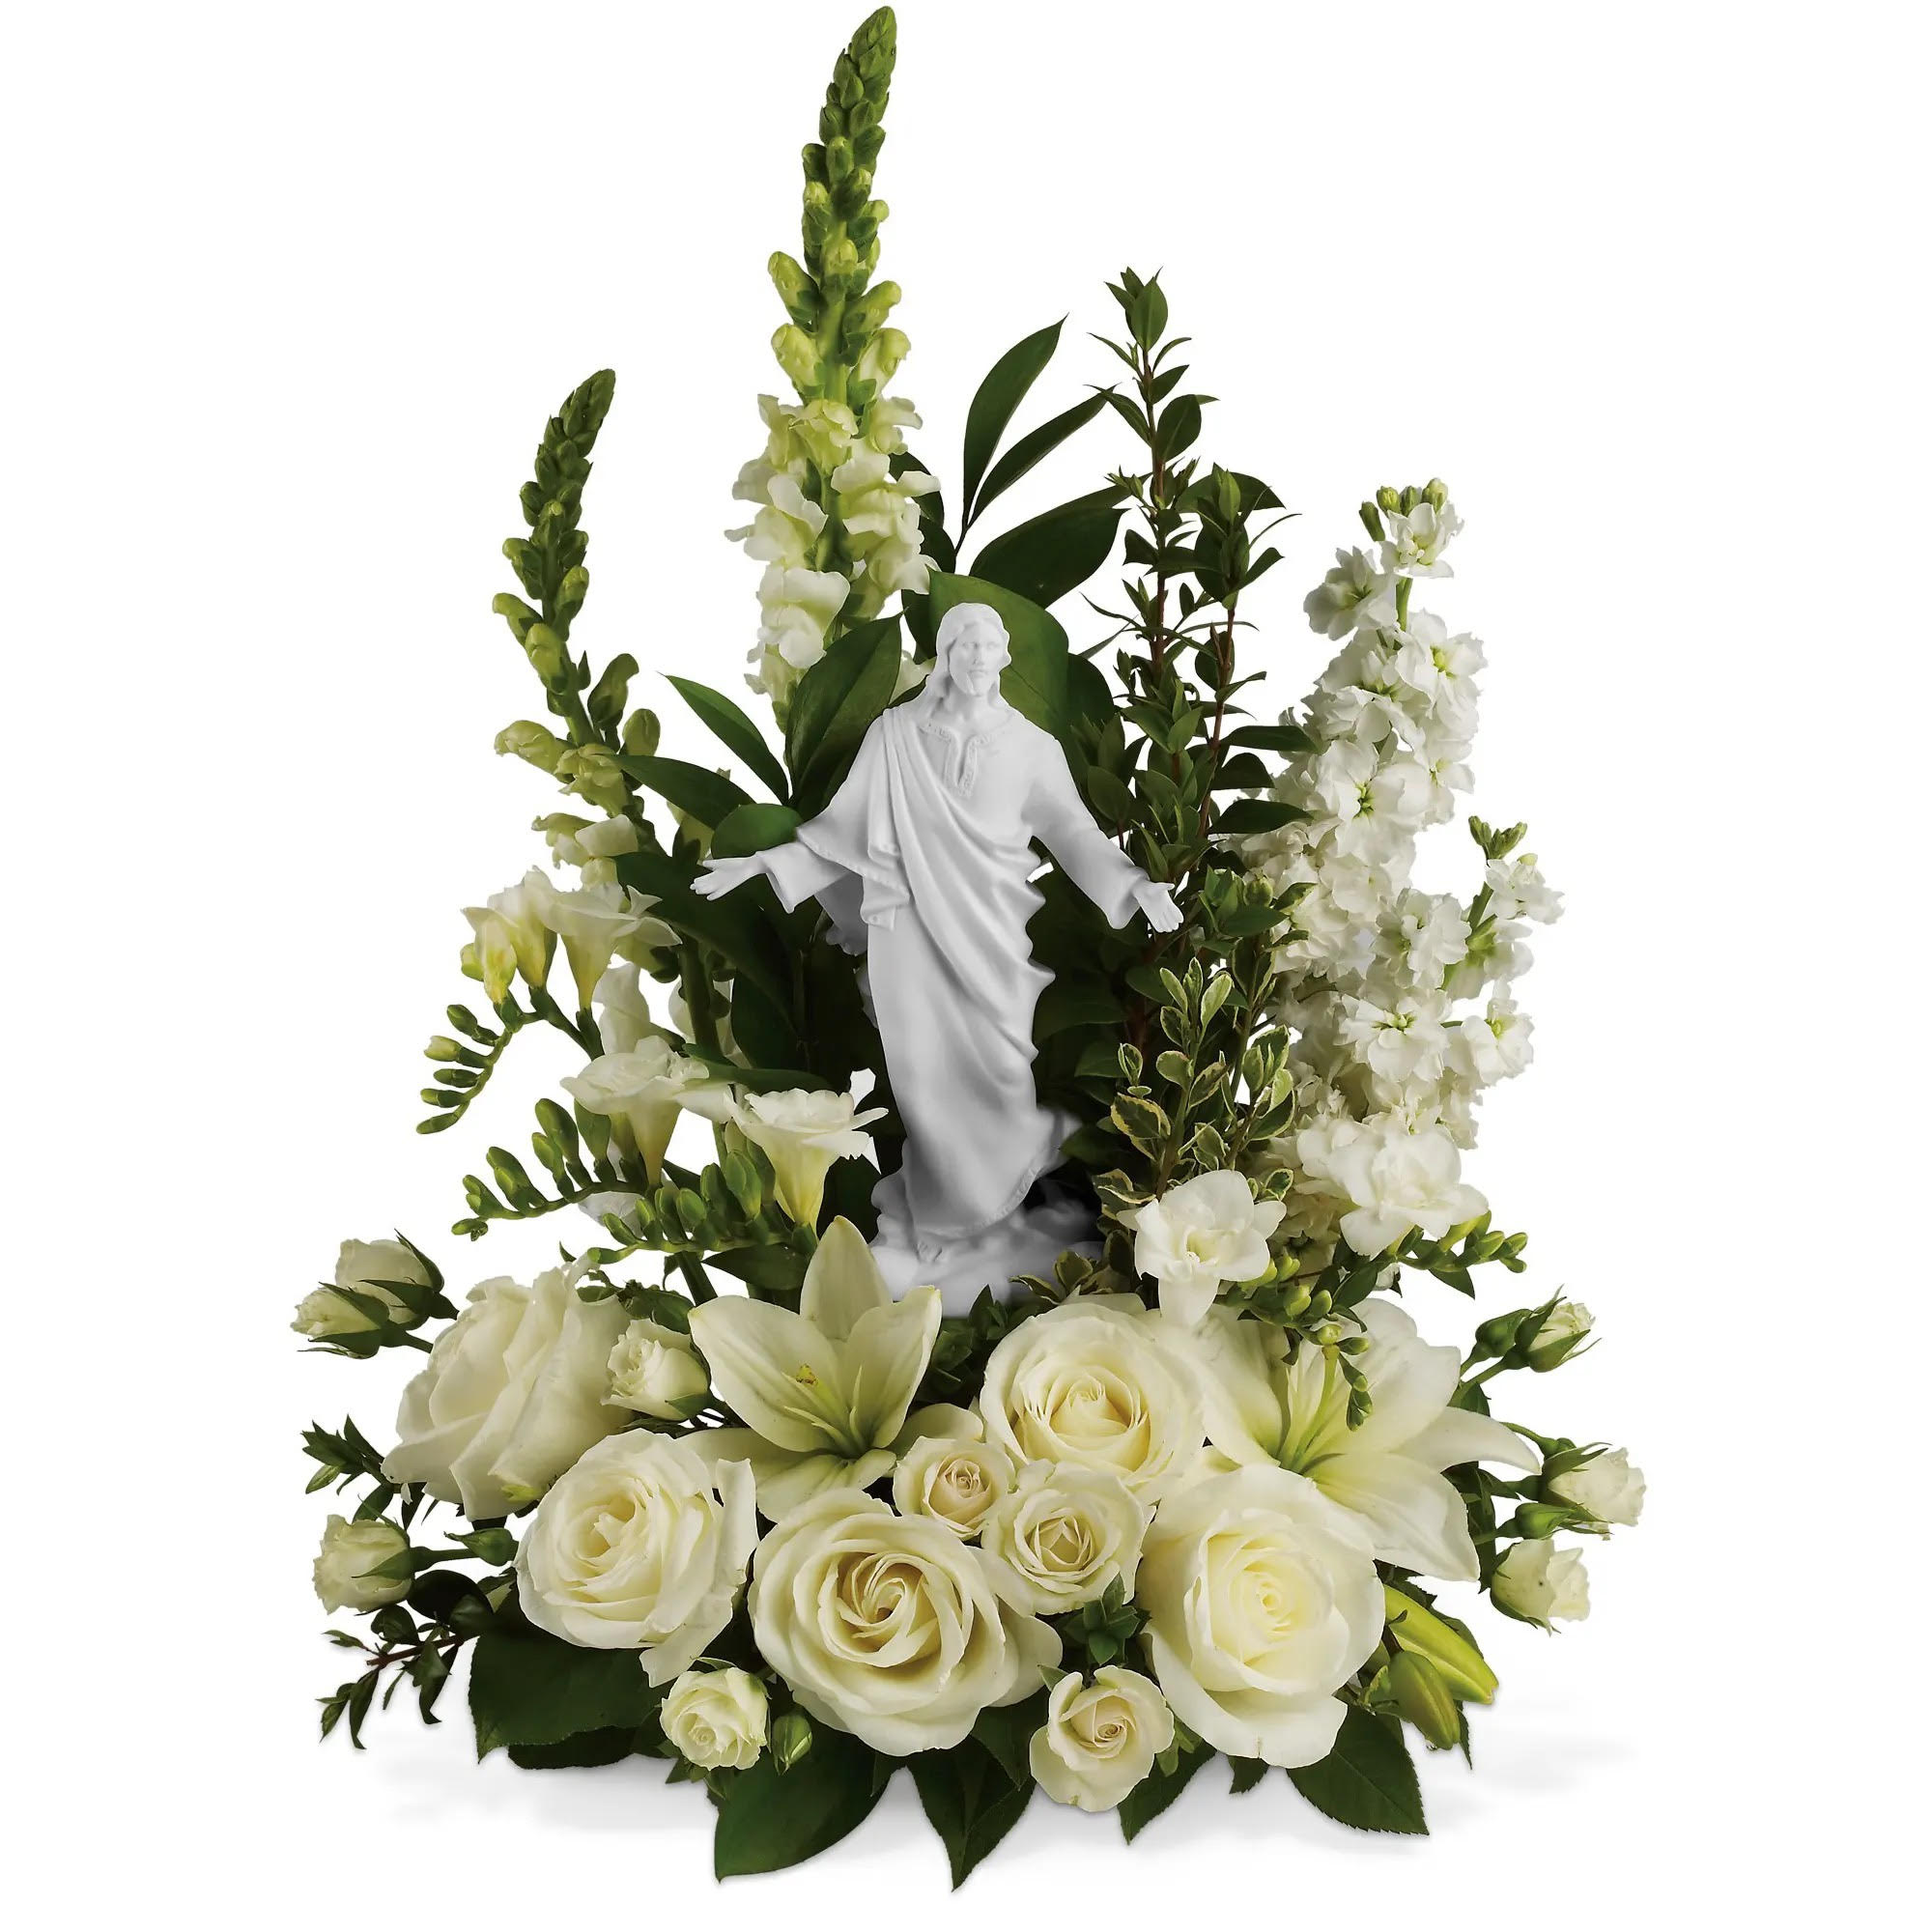 Teleflora's Garden of Serenity Bouquet - This exquisite porcelain sculpture of Jesus surrounded by radiant flowers will be a source of comfort to loved ones during a time of loss. Your thoughtfulness will be long remembered. The stunning bouquet includes white roses, stock, snapdragons, lilies and freesia accented with salal, myrtle and pittosporum. Delivered with a meticulously detailed porcelain sculpture of Jesus. Orientation: One-Sided Teleflora